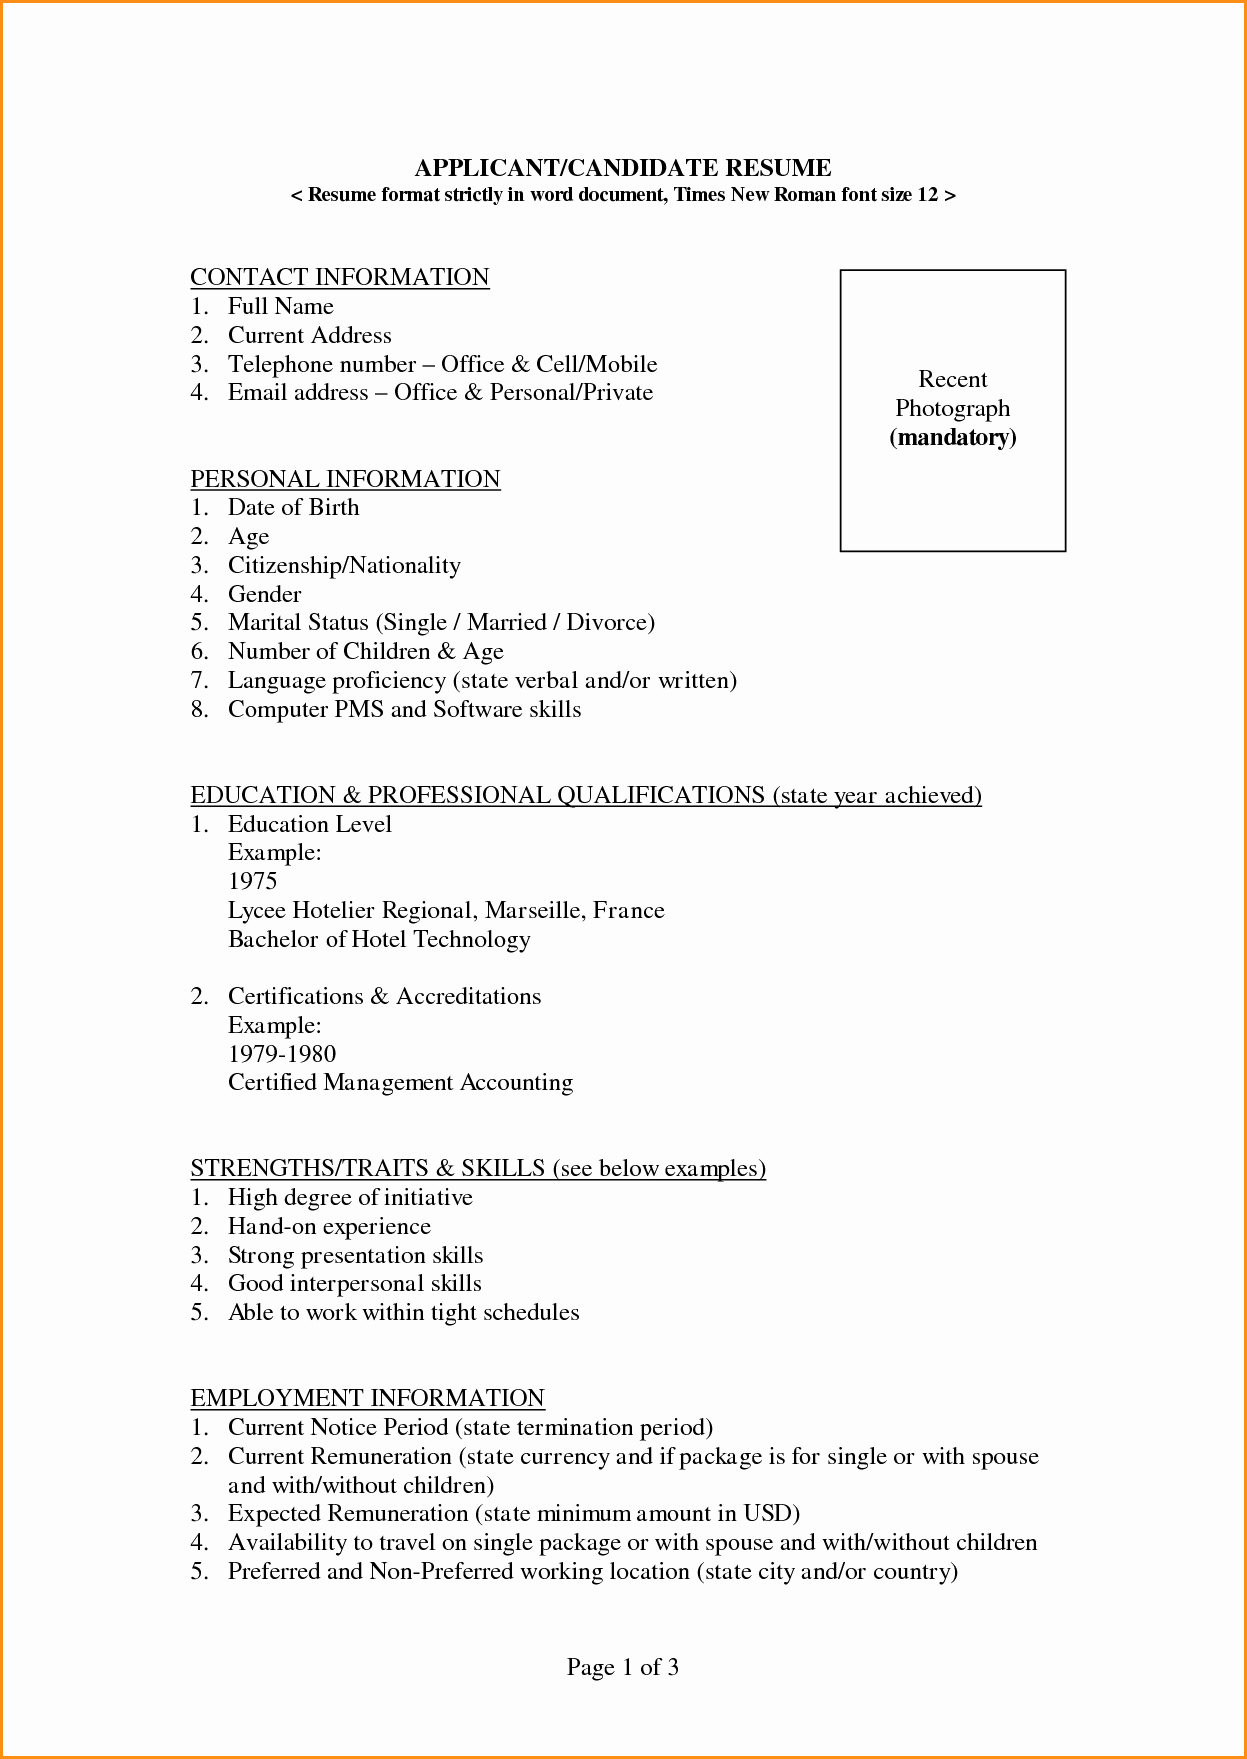 11 Freshers Resume Samples In Word format